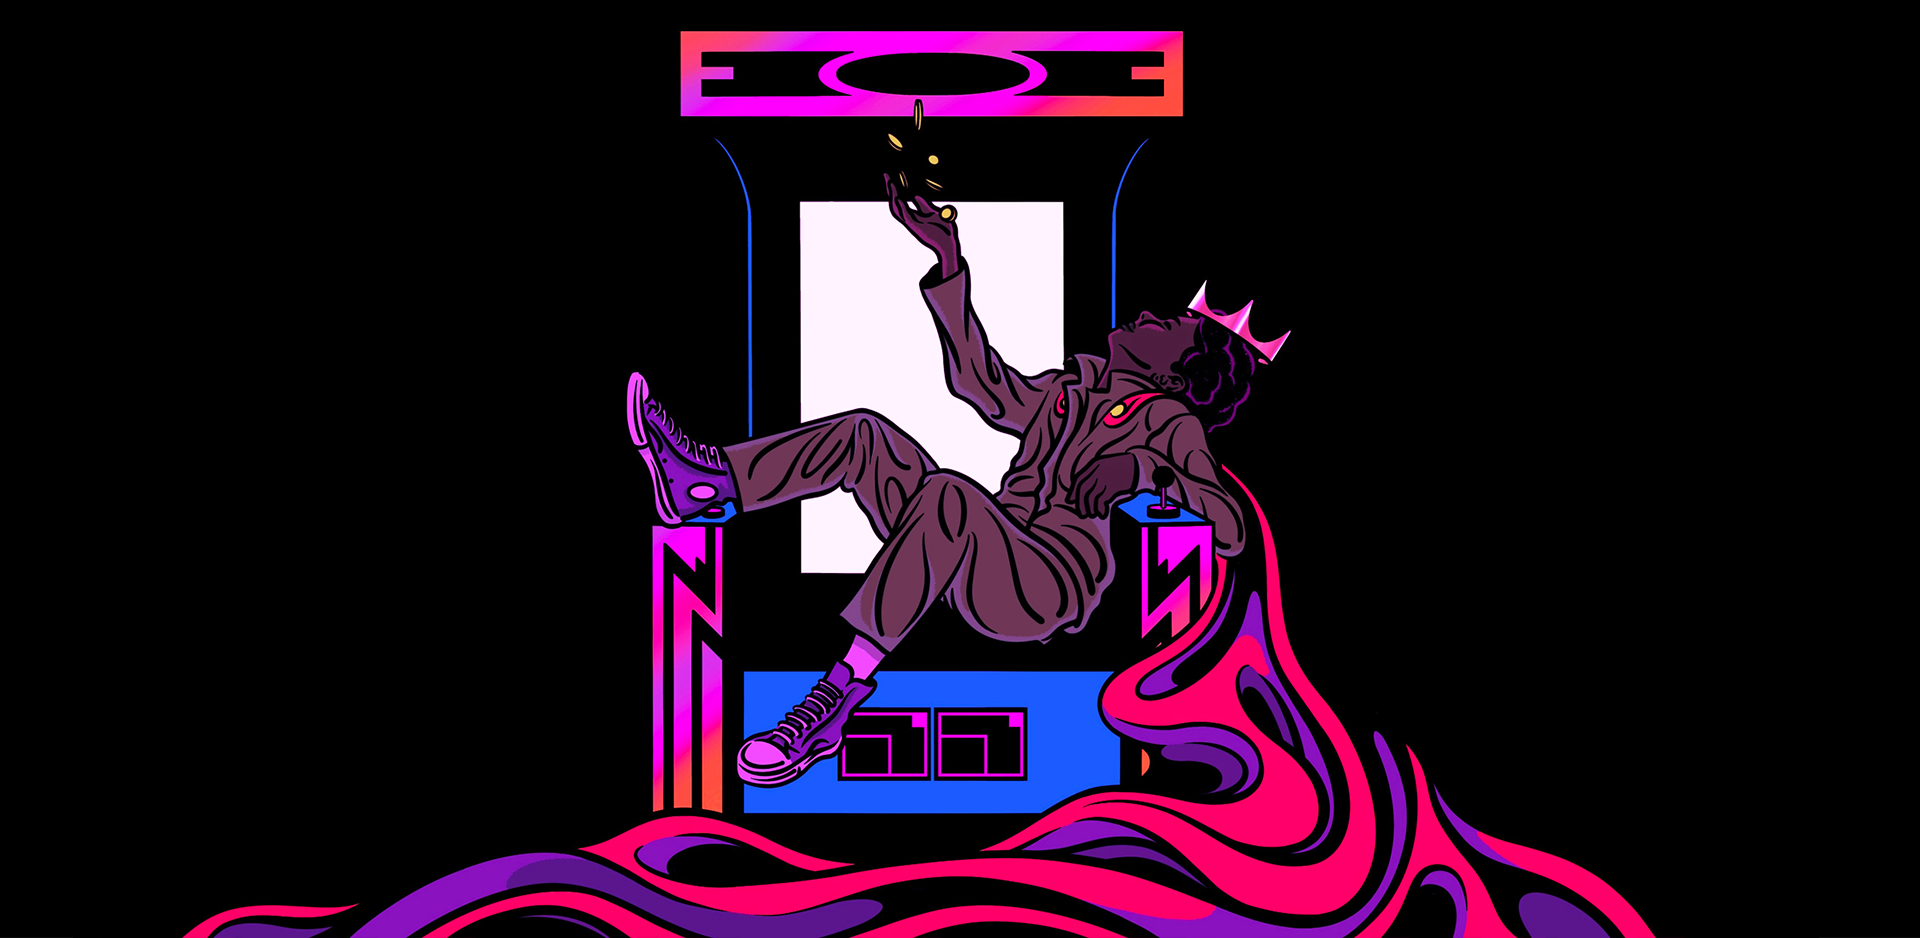 An illustration of a Black man with a crown reclining on an arcade game